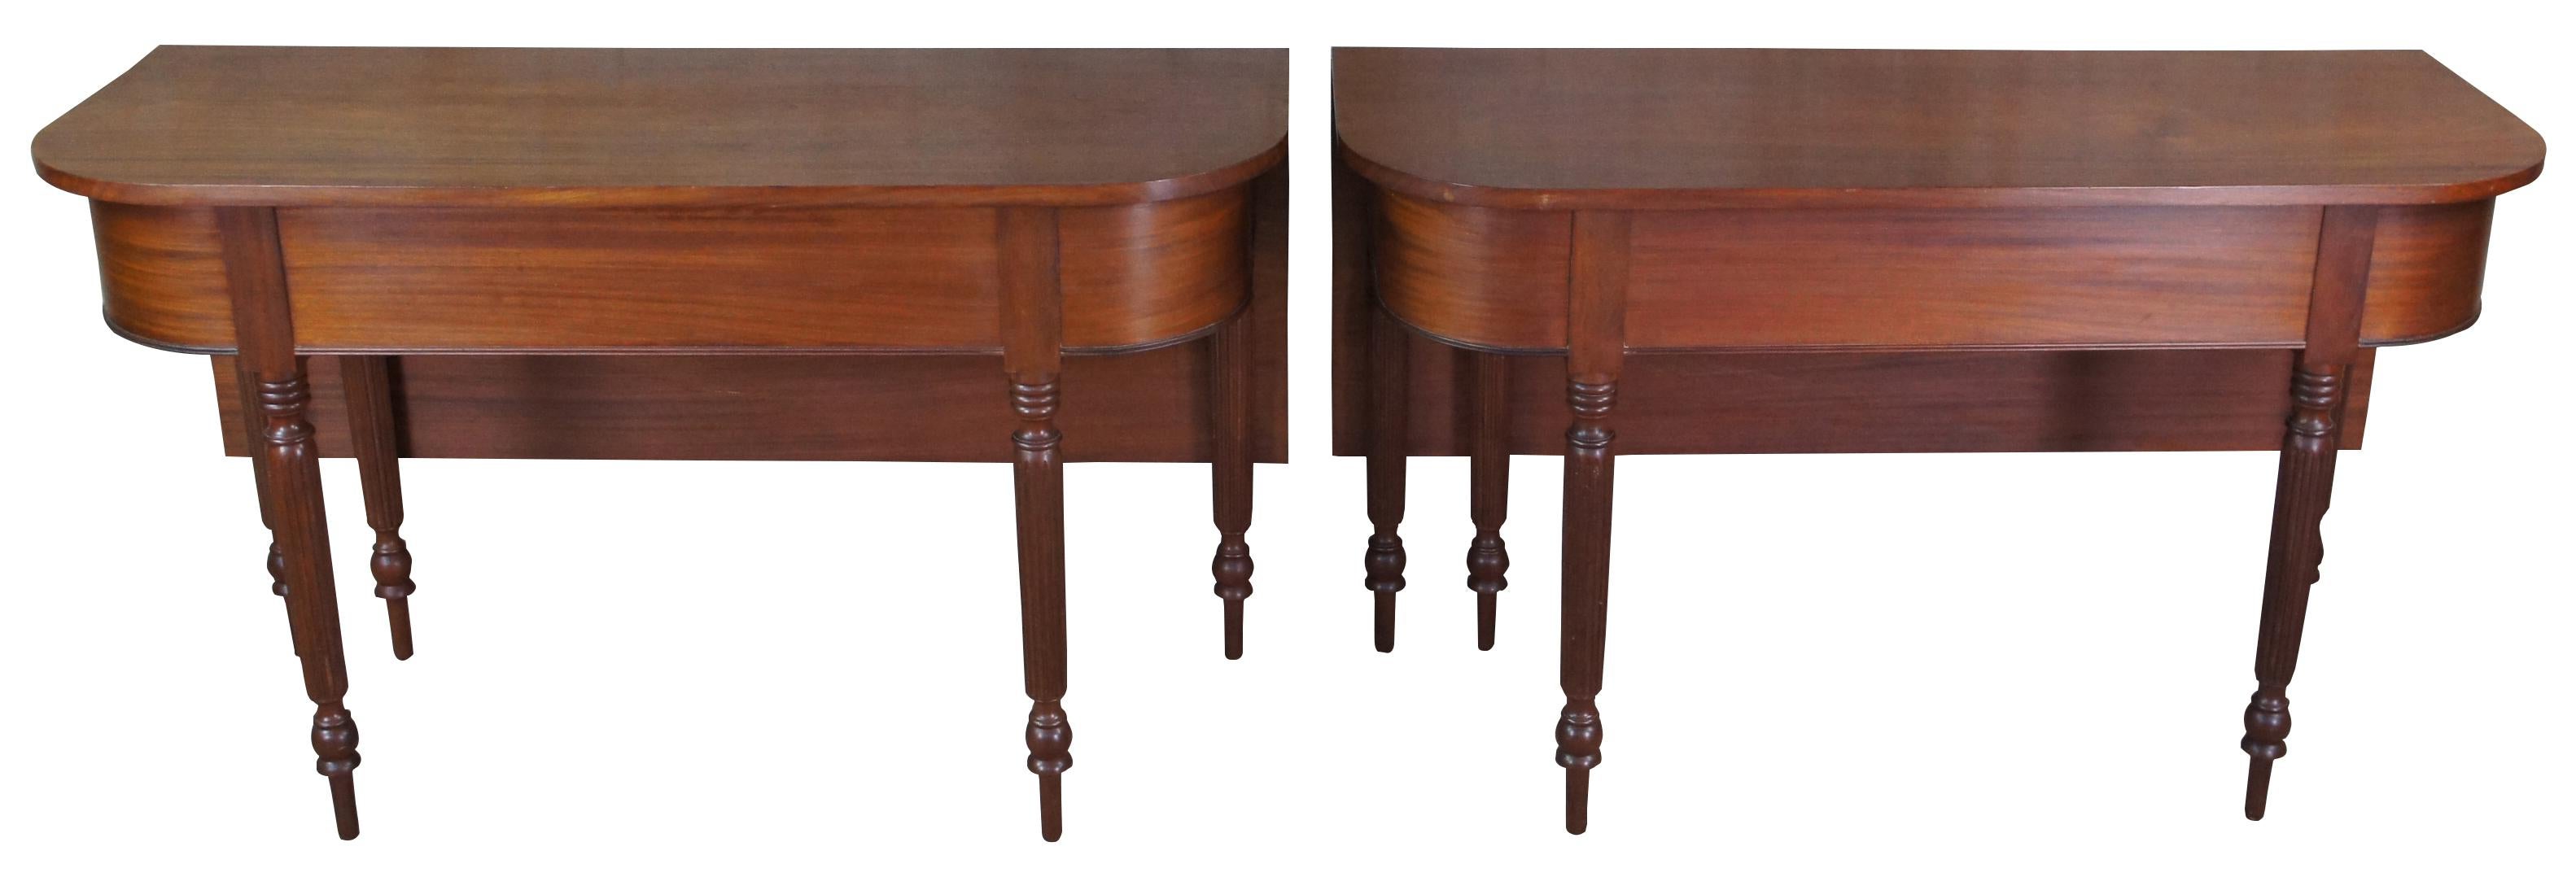 A fine and exquisite pair of antique 19th Century Sheraton banqueting tables, circa 1810s. Made of solid mahogany featuring demilune form with gate leg or large drop leaf that swings out via a hand carved wooden hinge. The tables are supported by